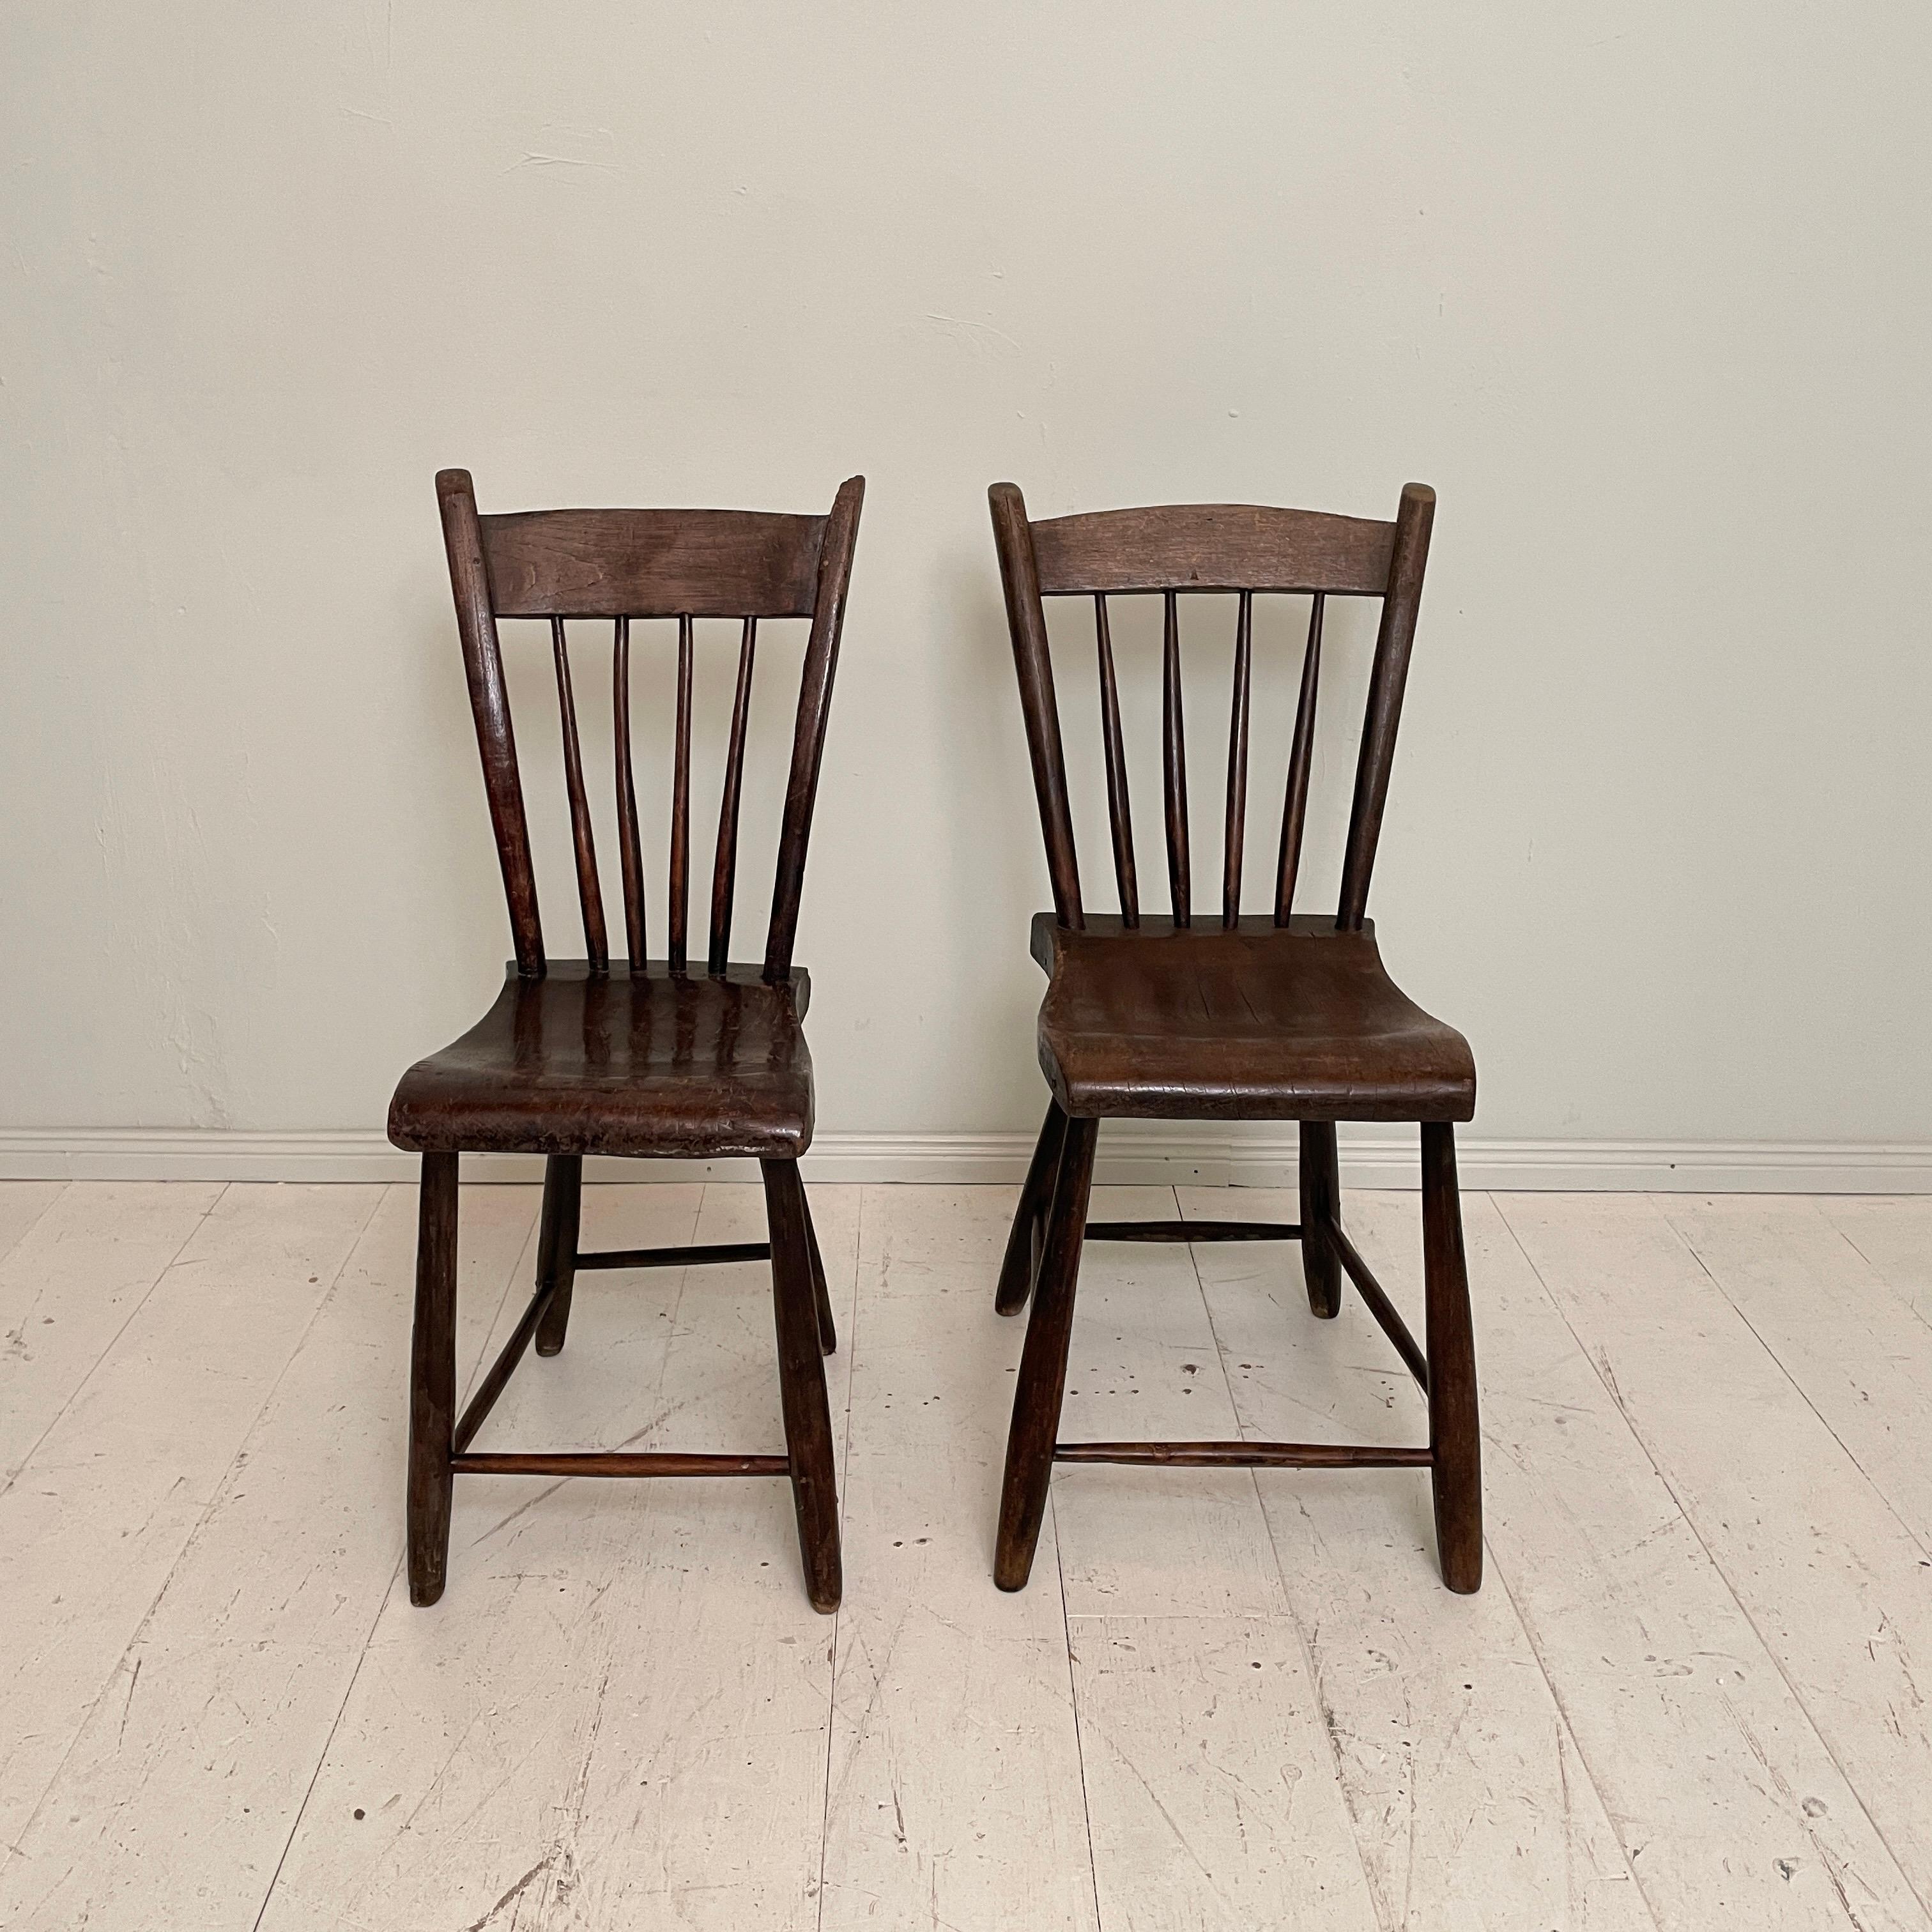 This unique Pair of French Wabi-Sabi Country Chairs in Elm was made around 1830.
They are completely hand-made and hand-carved and have a fantastic Patina.
Beautiful original condition.
A unique piece which is a great eye-catcher for your